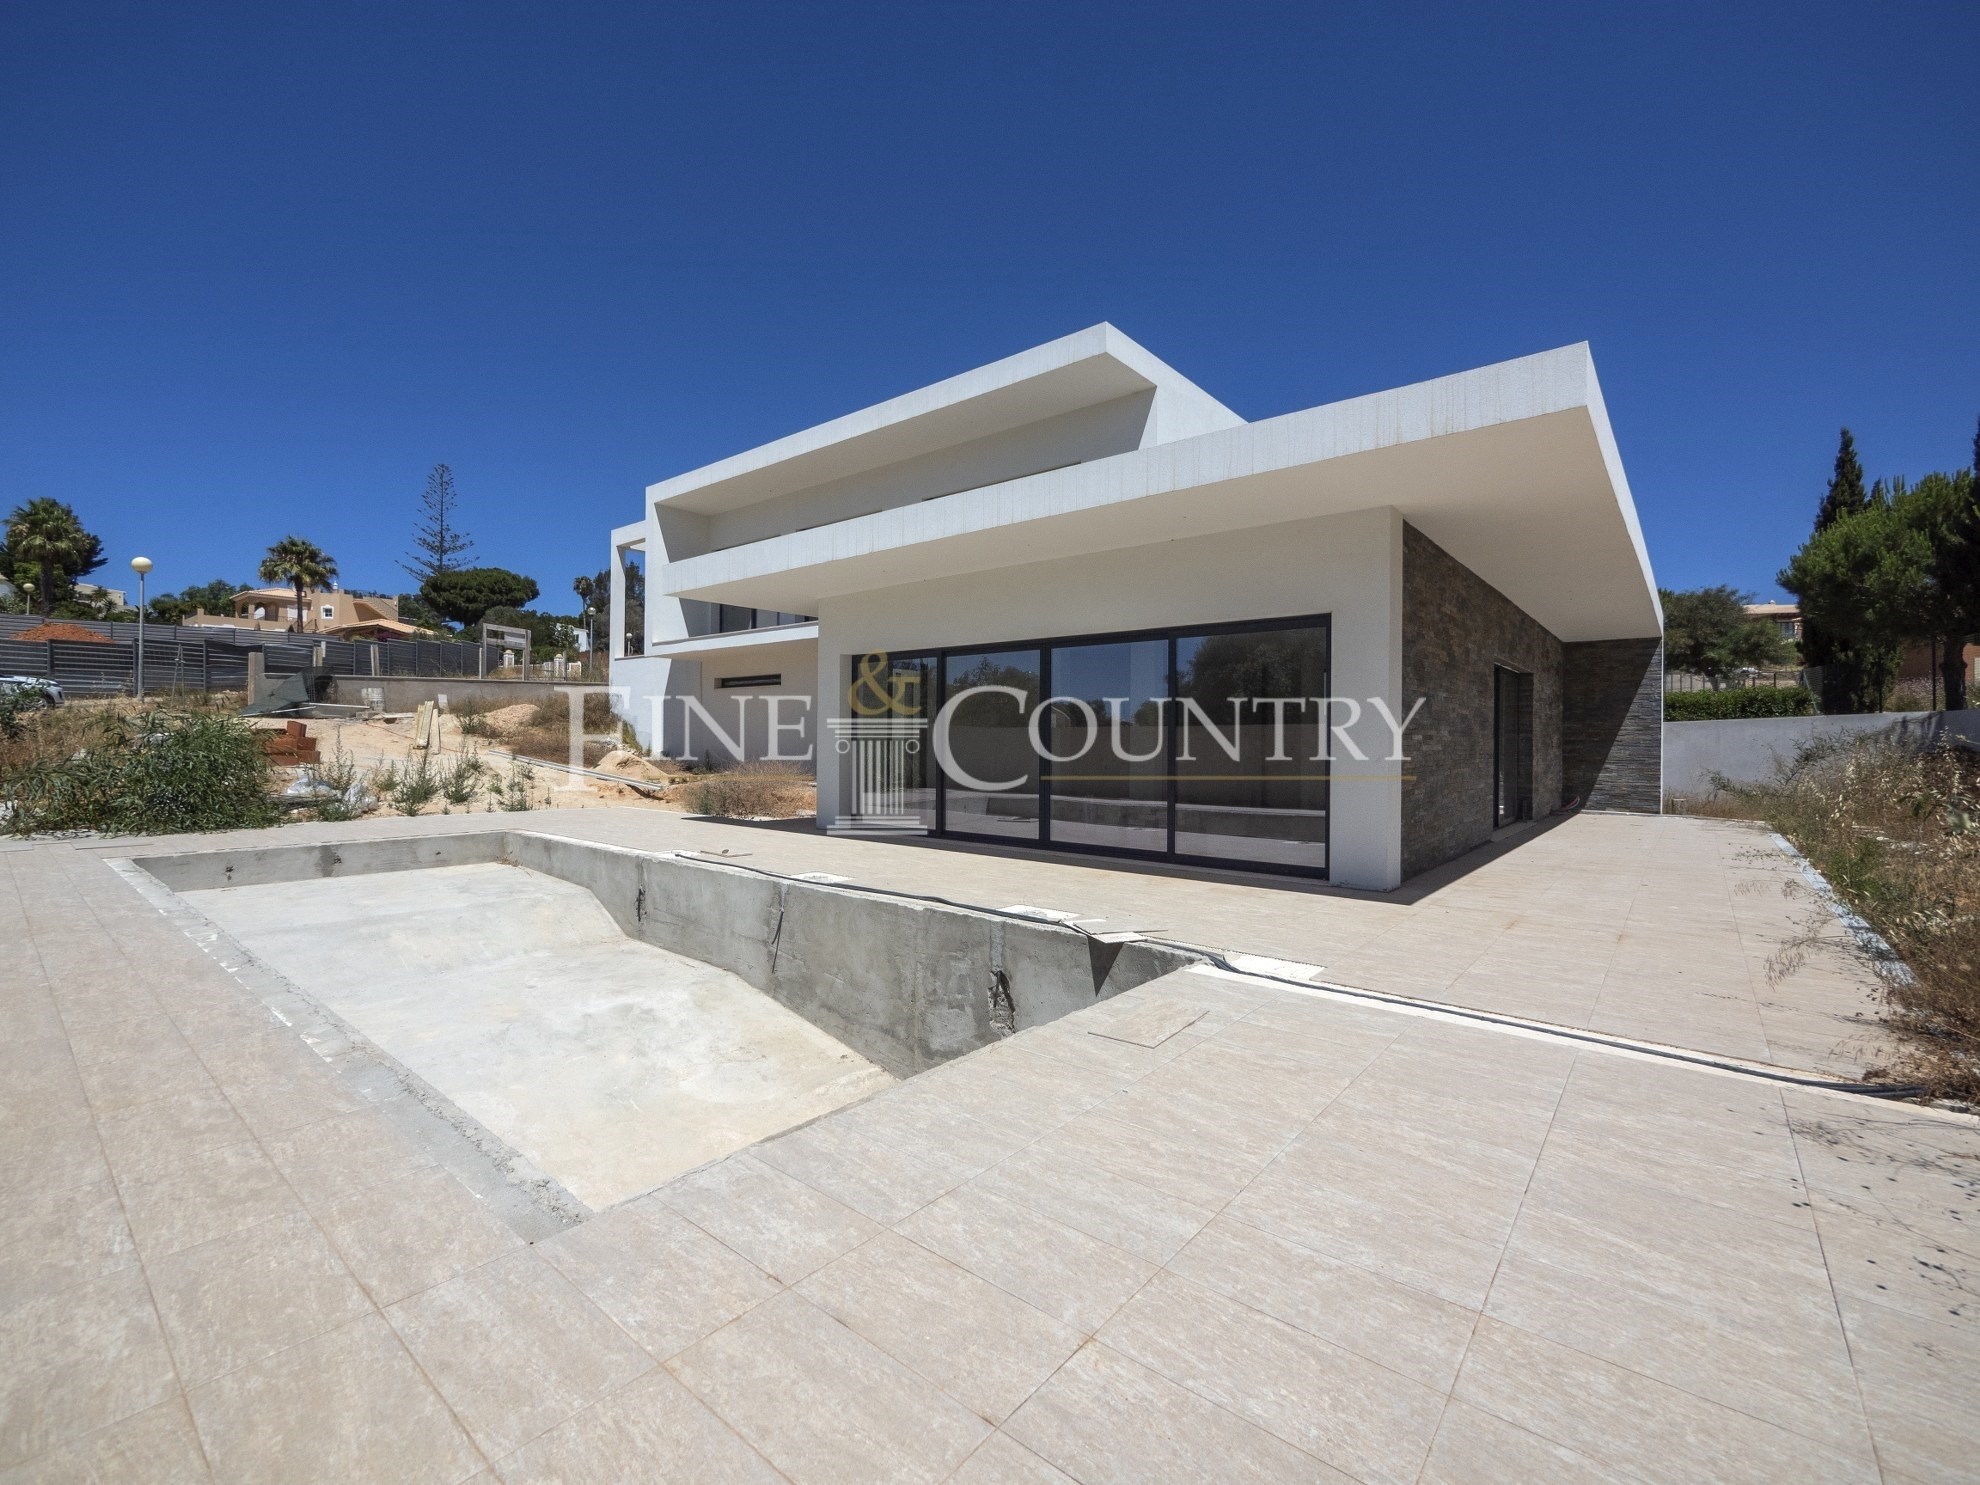 Photo of Carvoeiro – 3 + 1 bedrooms contemporary villa with pool, garage and roof terrace